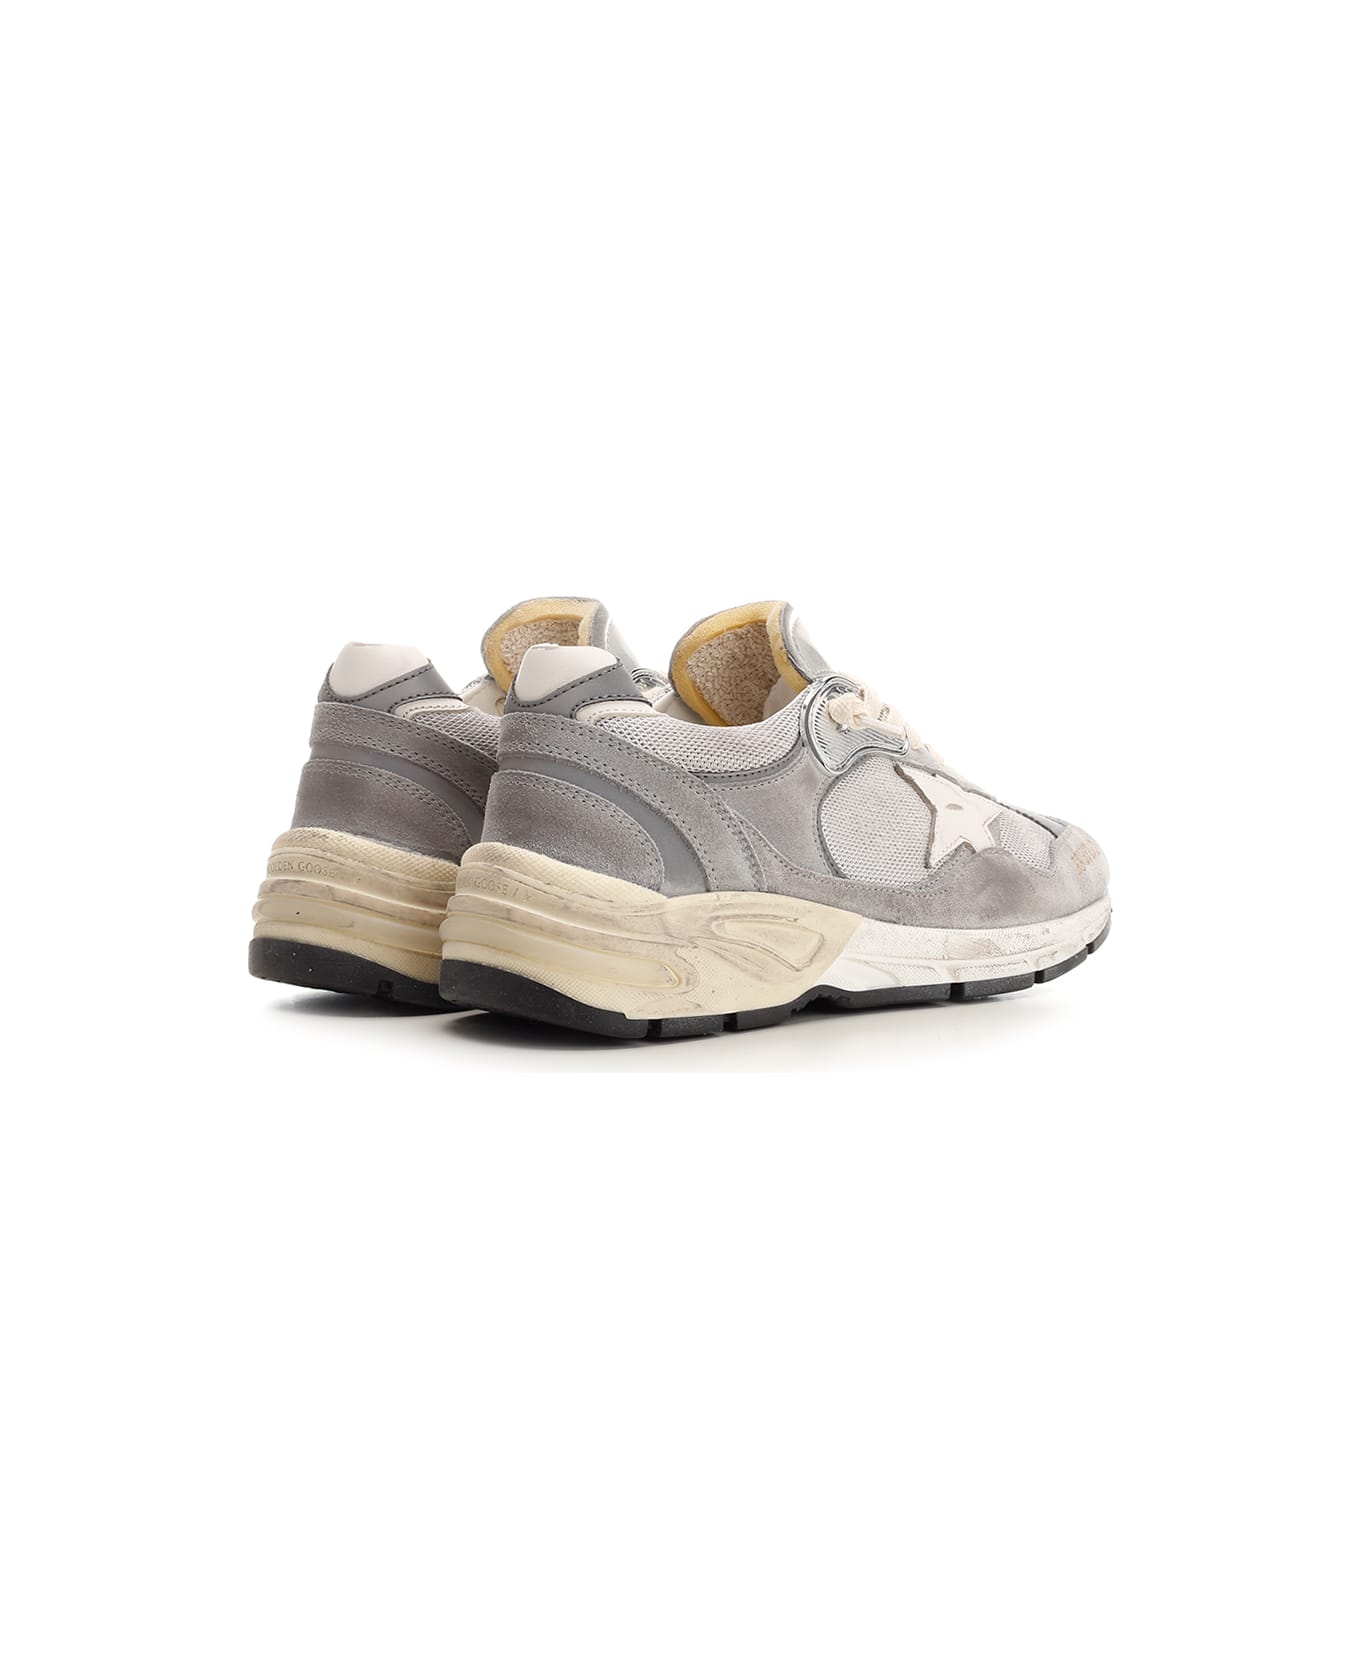 Golden Goose 'running Dad' Sneakers - grey/SILVER/WHITE